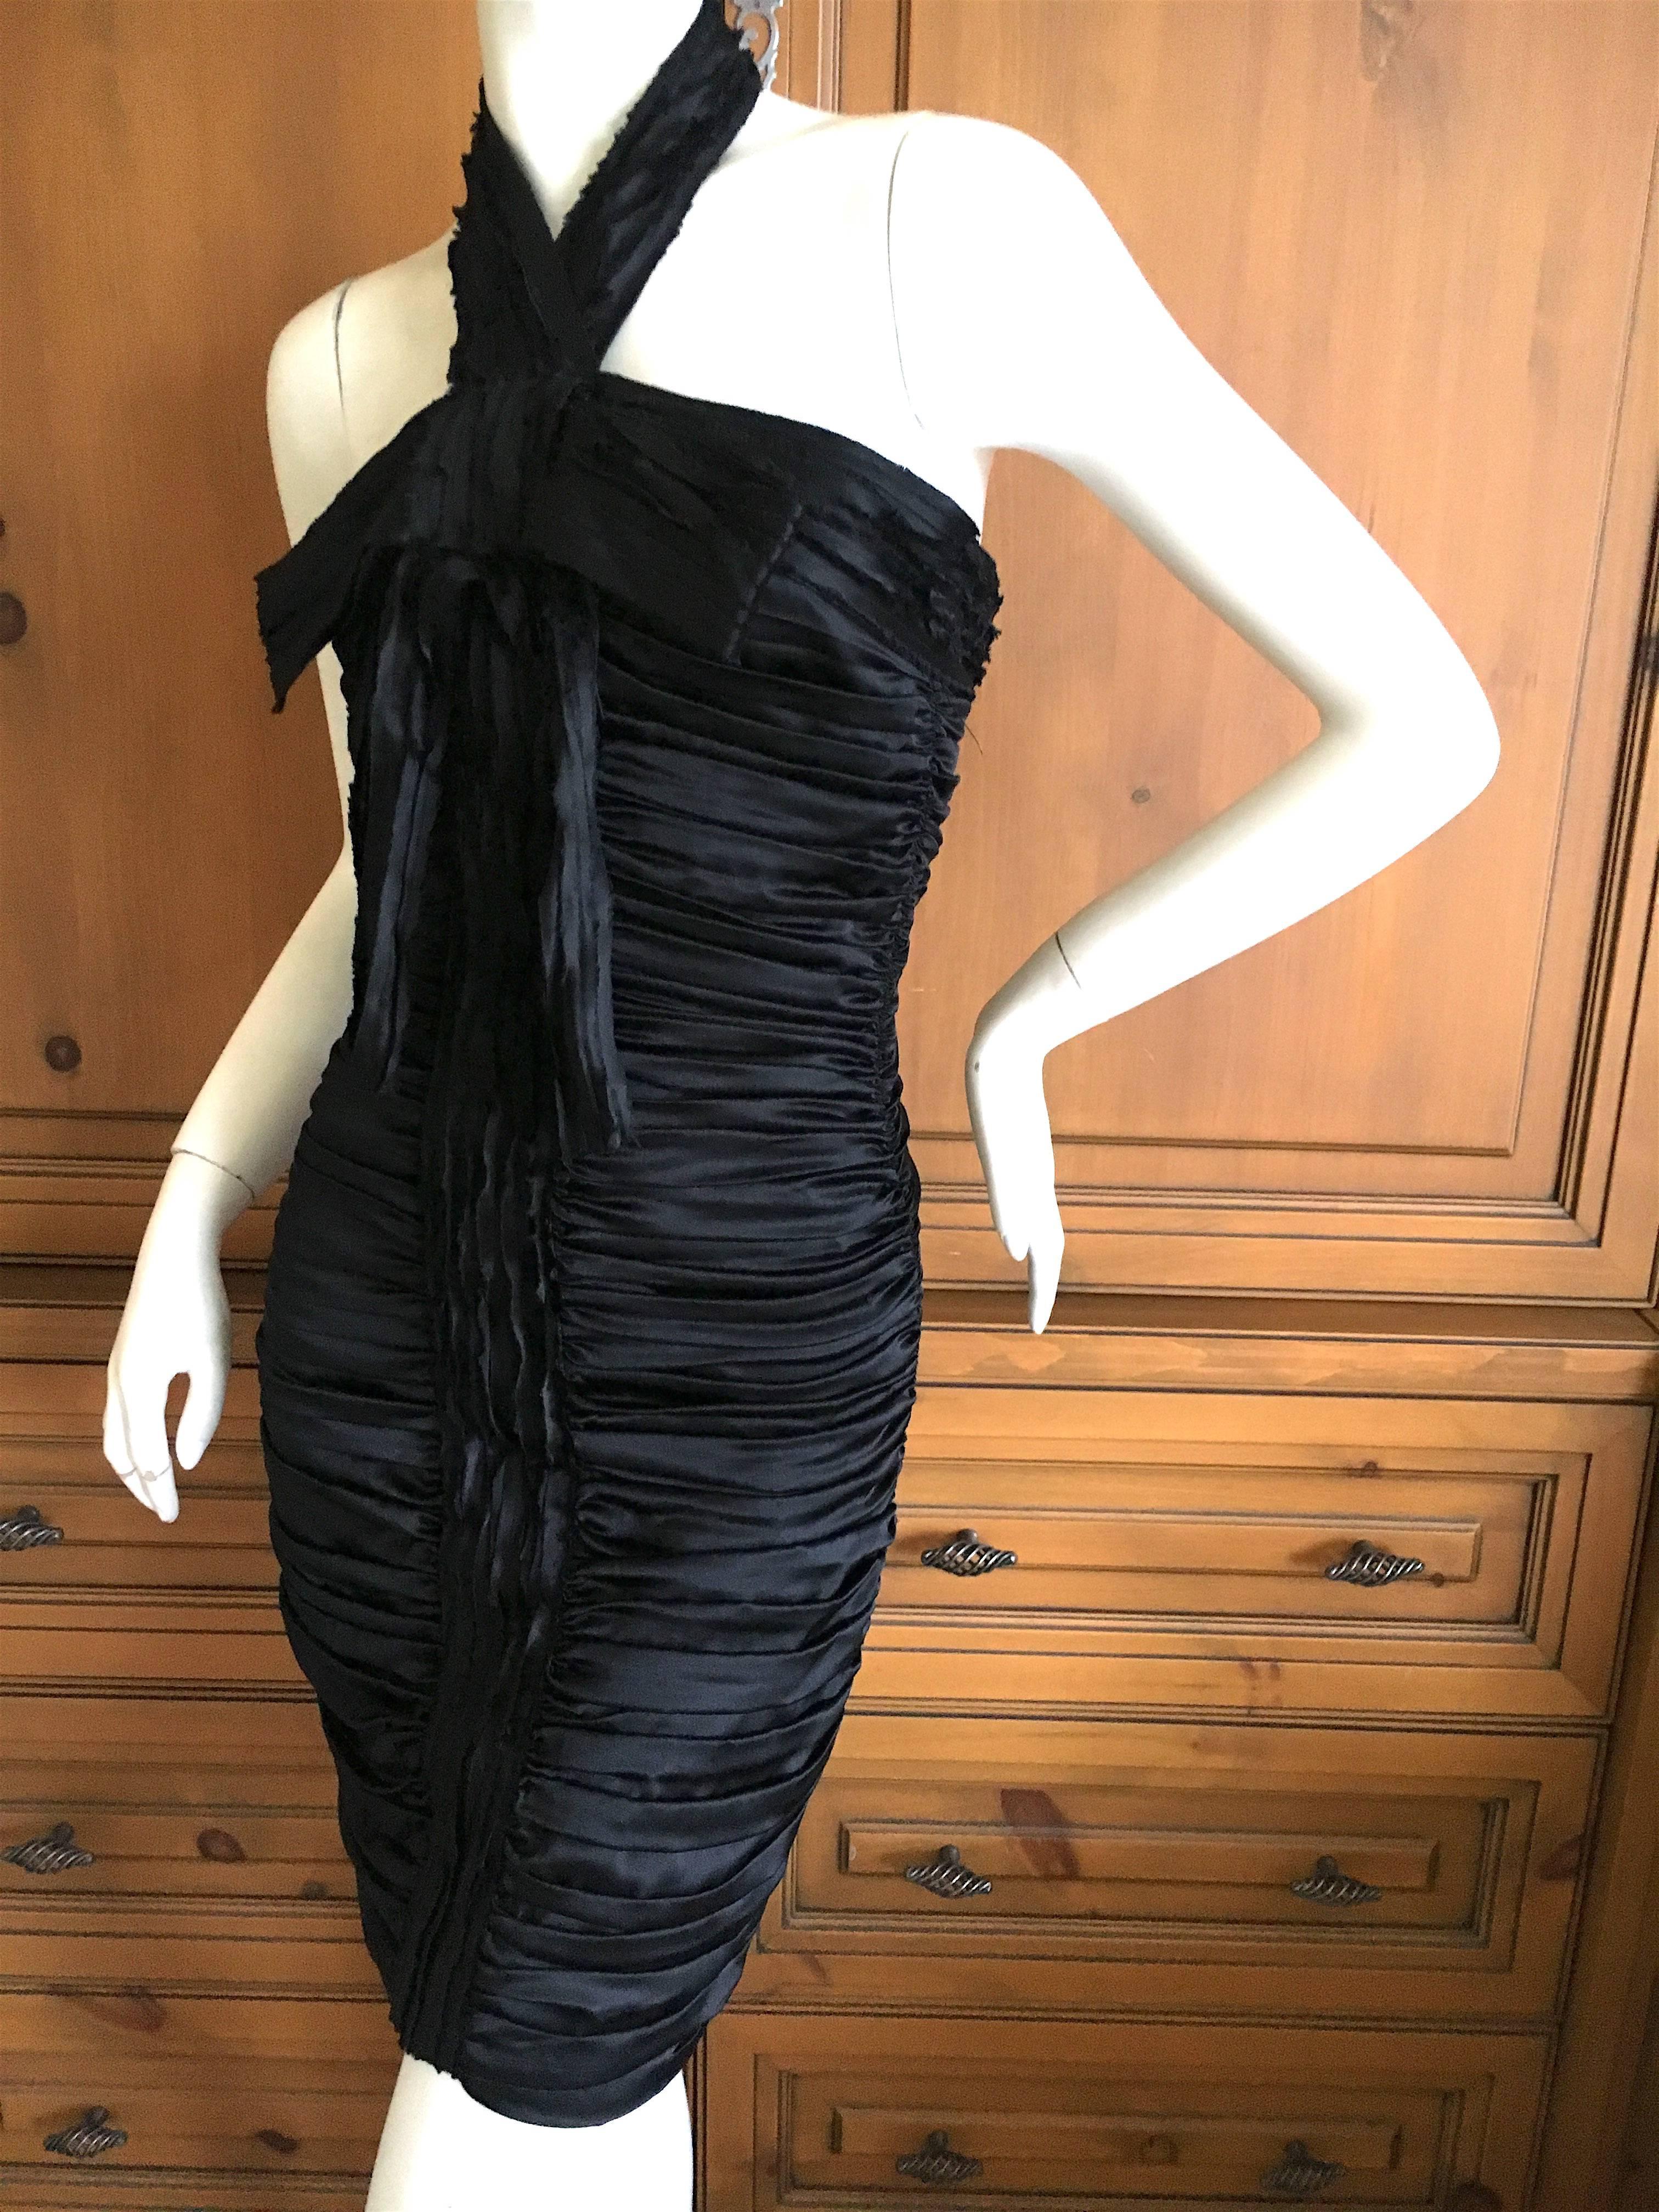 D & G Dolce & Gabbana Pleated Silk Little Black Dress with Bow.
Size 42
Bust 36"
Waist 26"
Hips 39"
Length 40"
Excellent condition